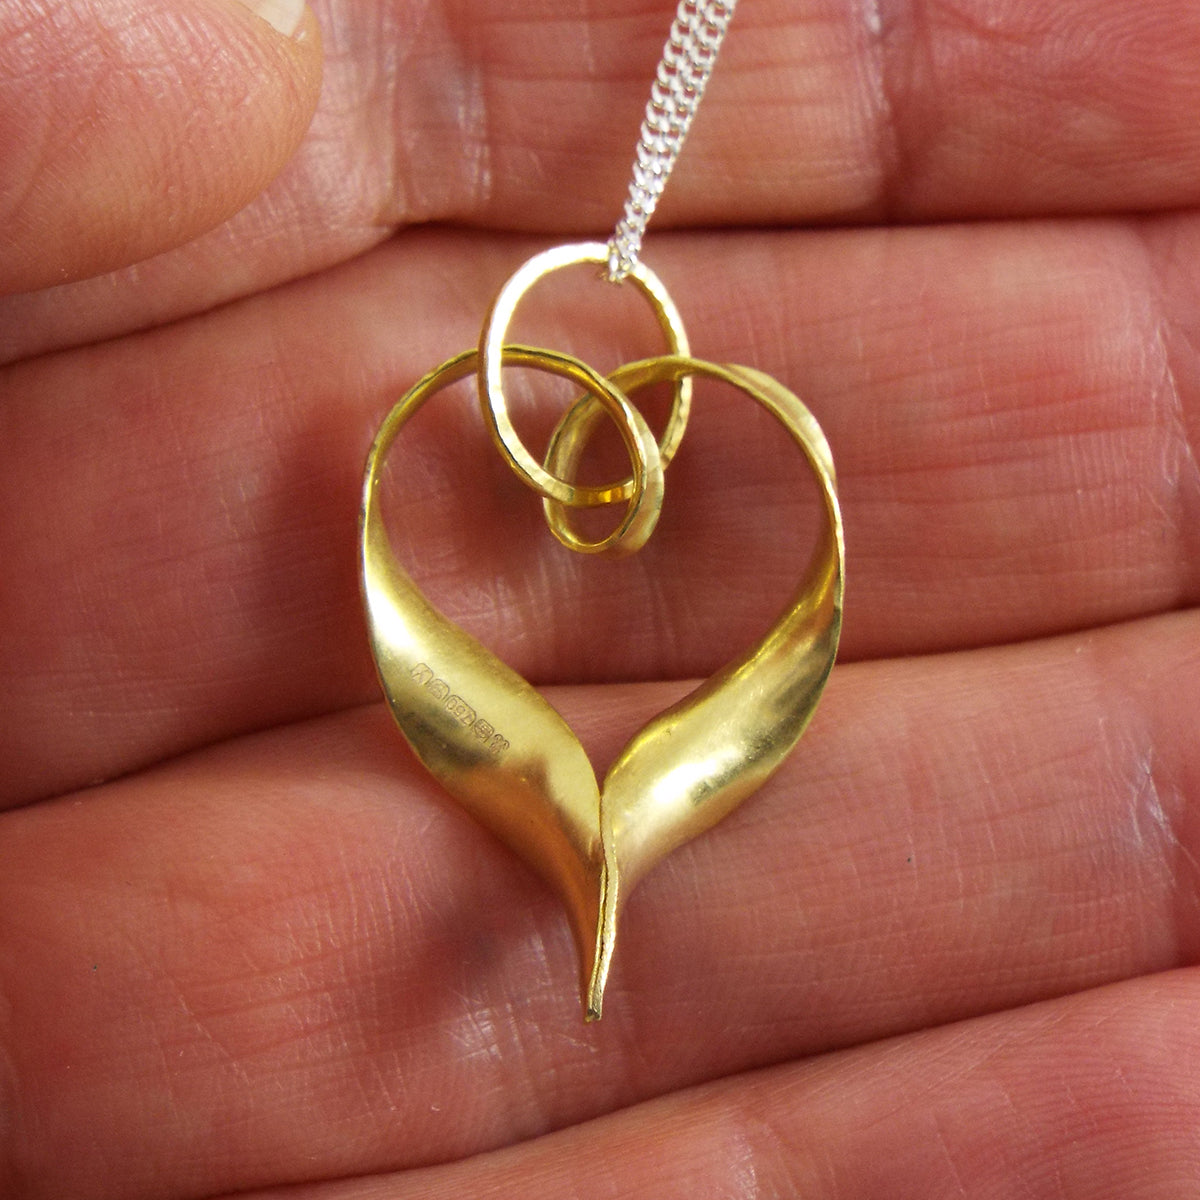 A recycled 18 carat gold heart pendant made from a ribbon of metal, hammered into a continuous heart shape, with a loop at the top for the chain to pass through and elegant twisted ends which join in a point at the bottom. This is a back view, showing the hallmark and the scale relative to the hand.